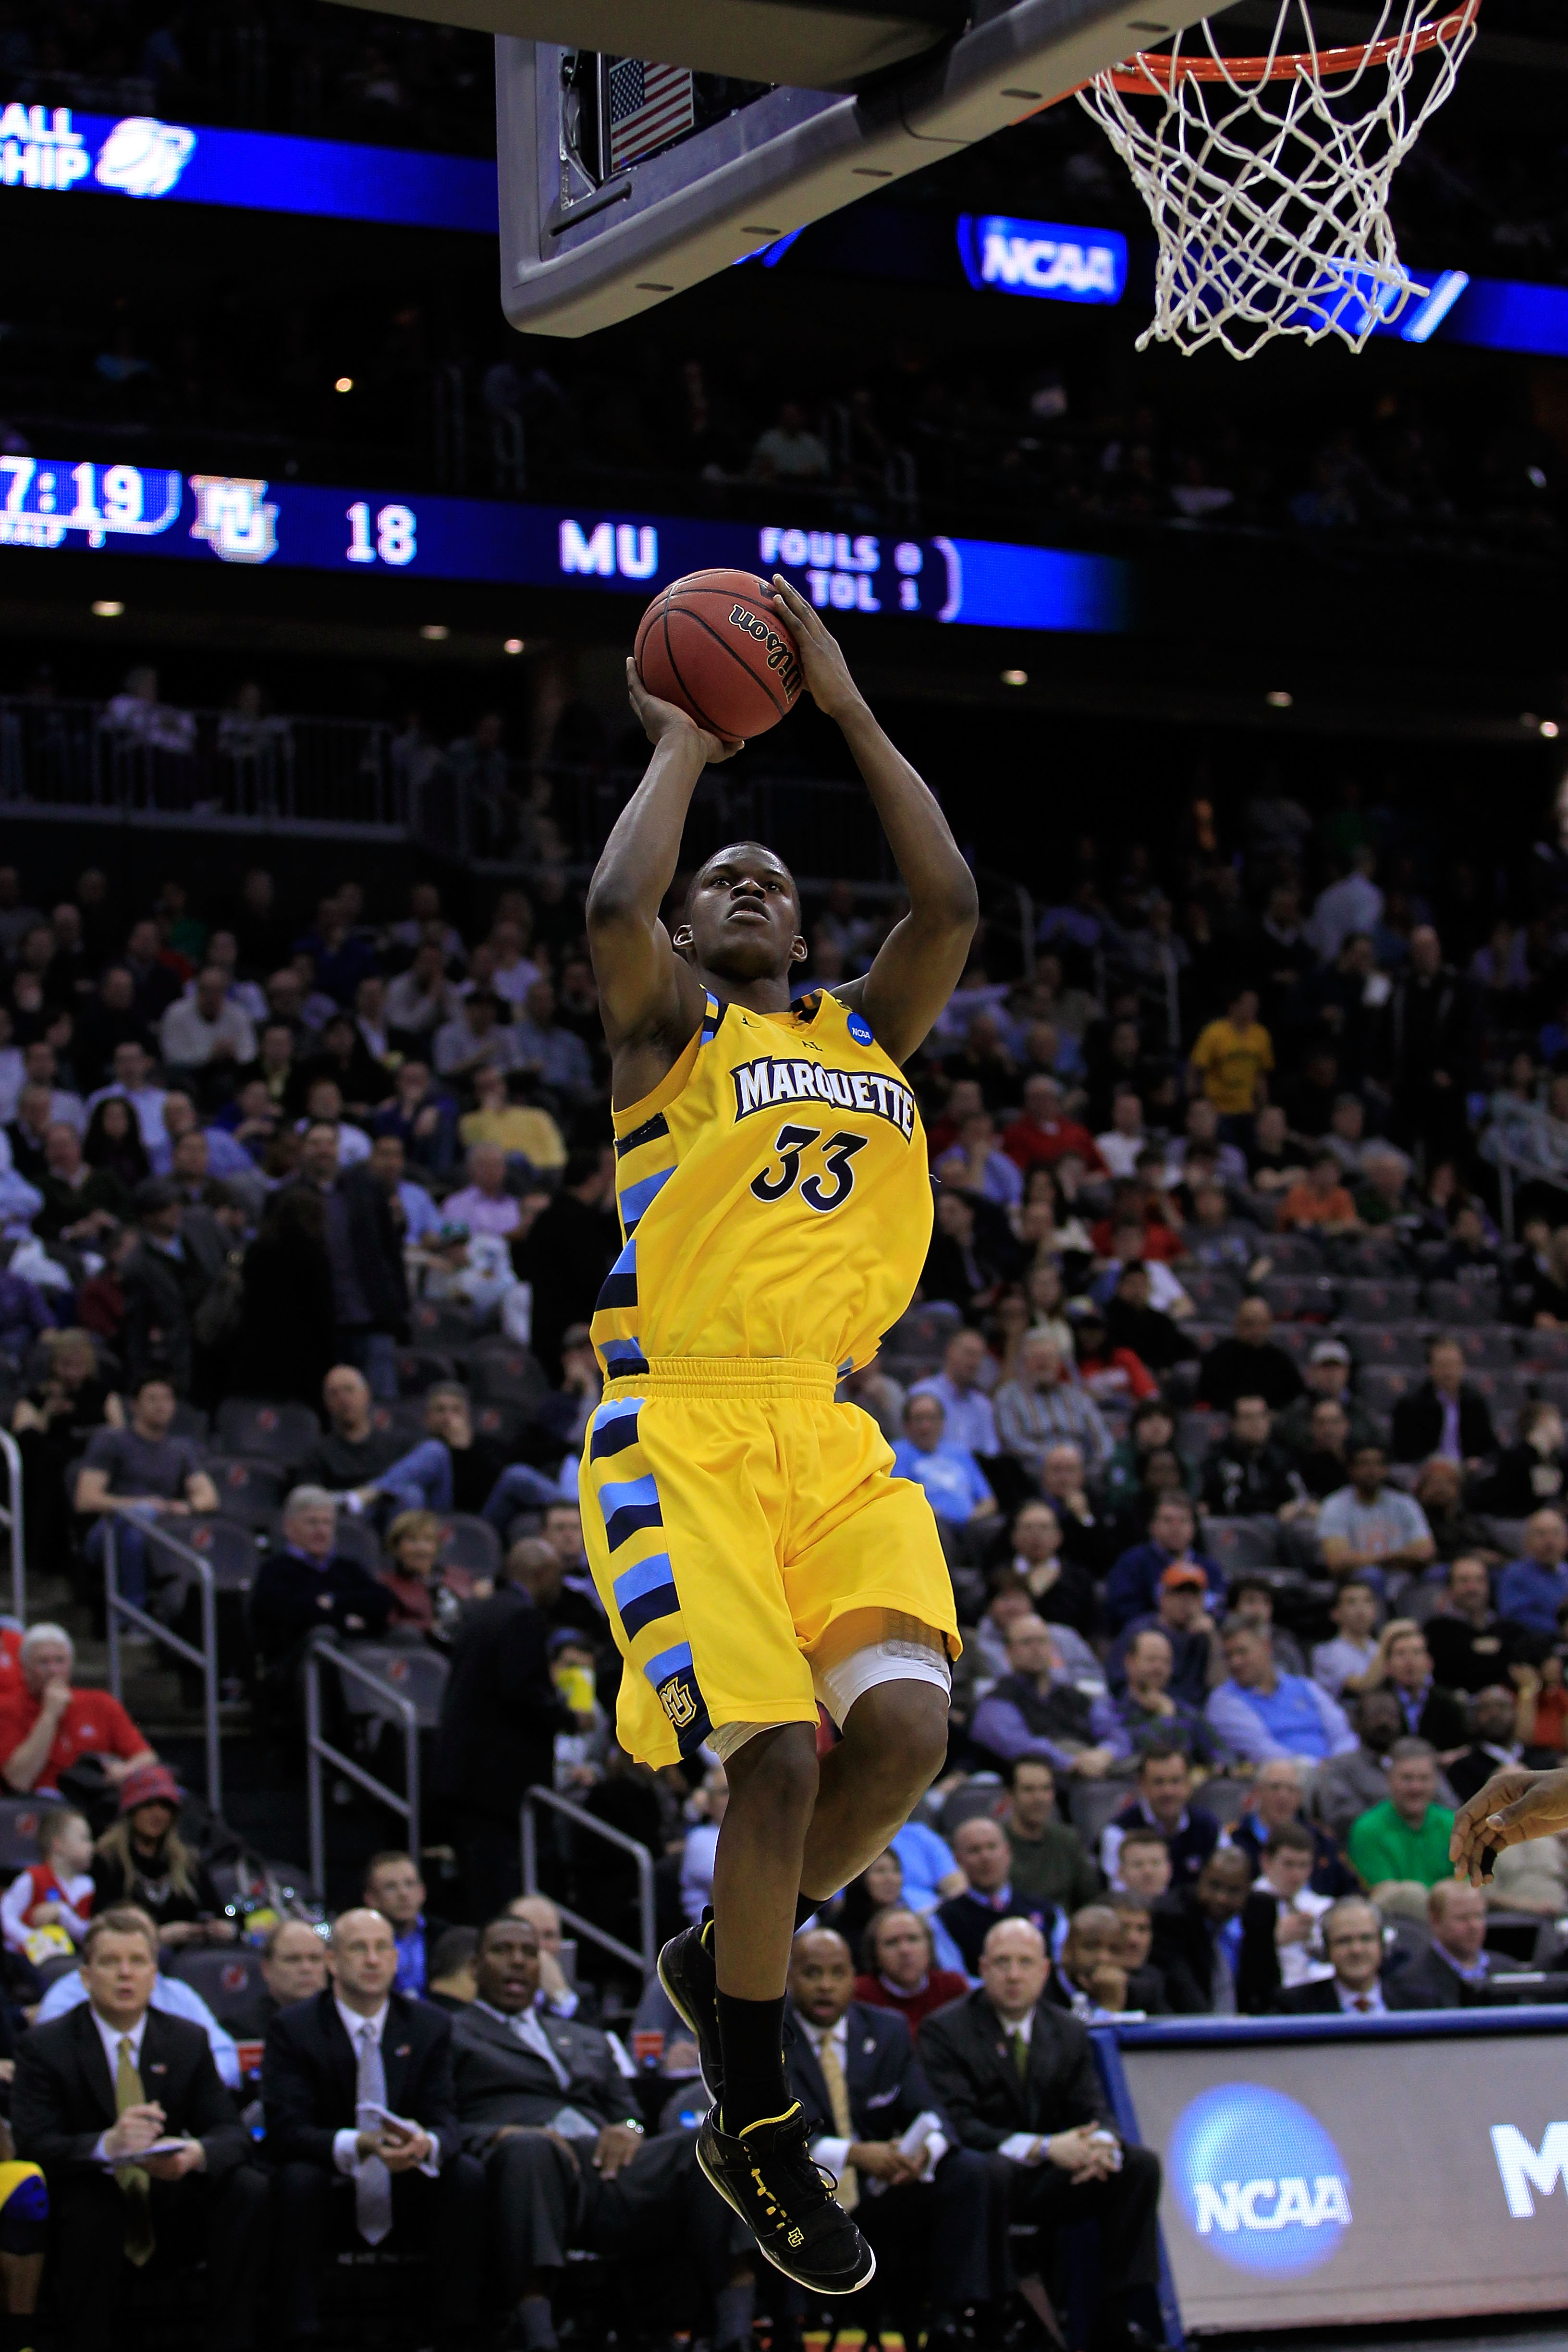 NEWARK, NJ - MARCH 25:  Jimmy Butler #33 of the Marquette Golden Eagles in action against the North Carolina Tar Heels during the east regional semifinal of the 2011 NCAA Men's Basketball Tournament at the Prudential Center on March 25, 2011 in Newark, Ne